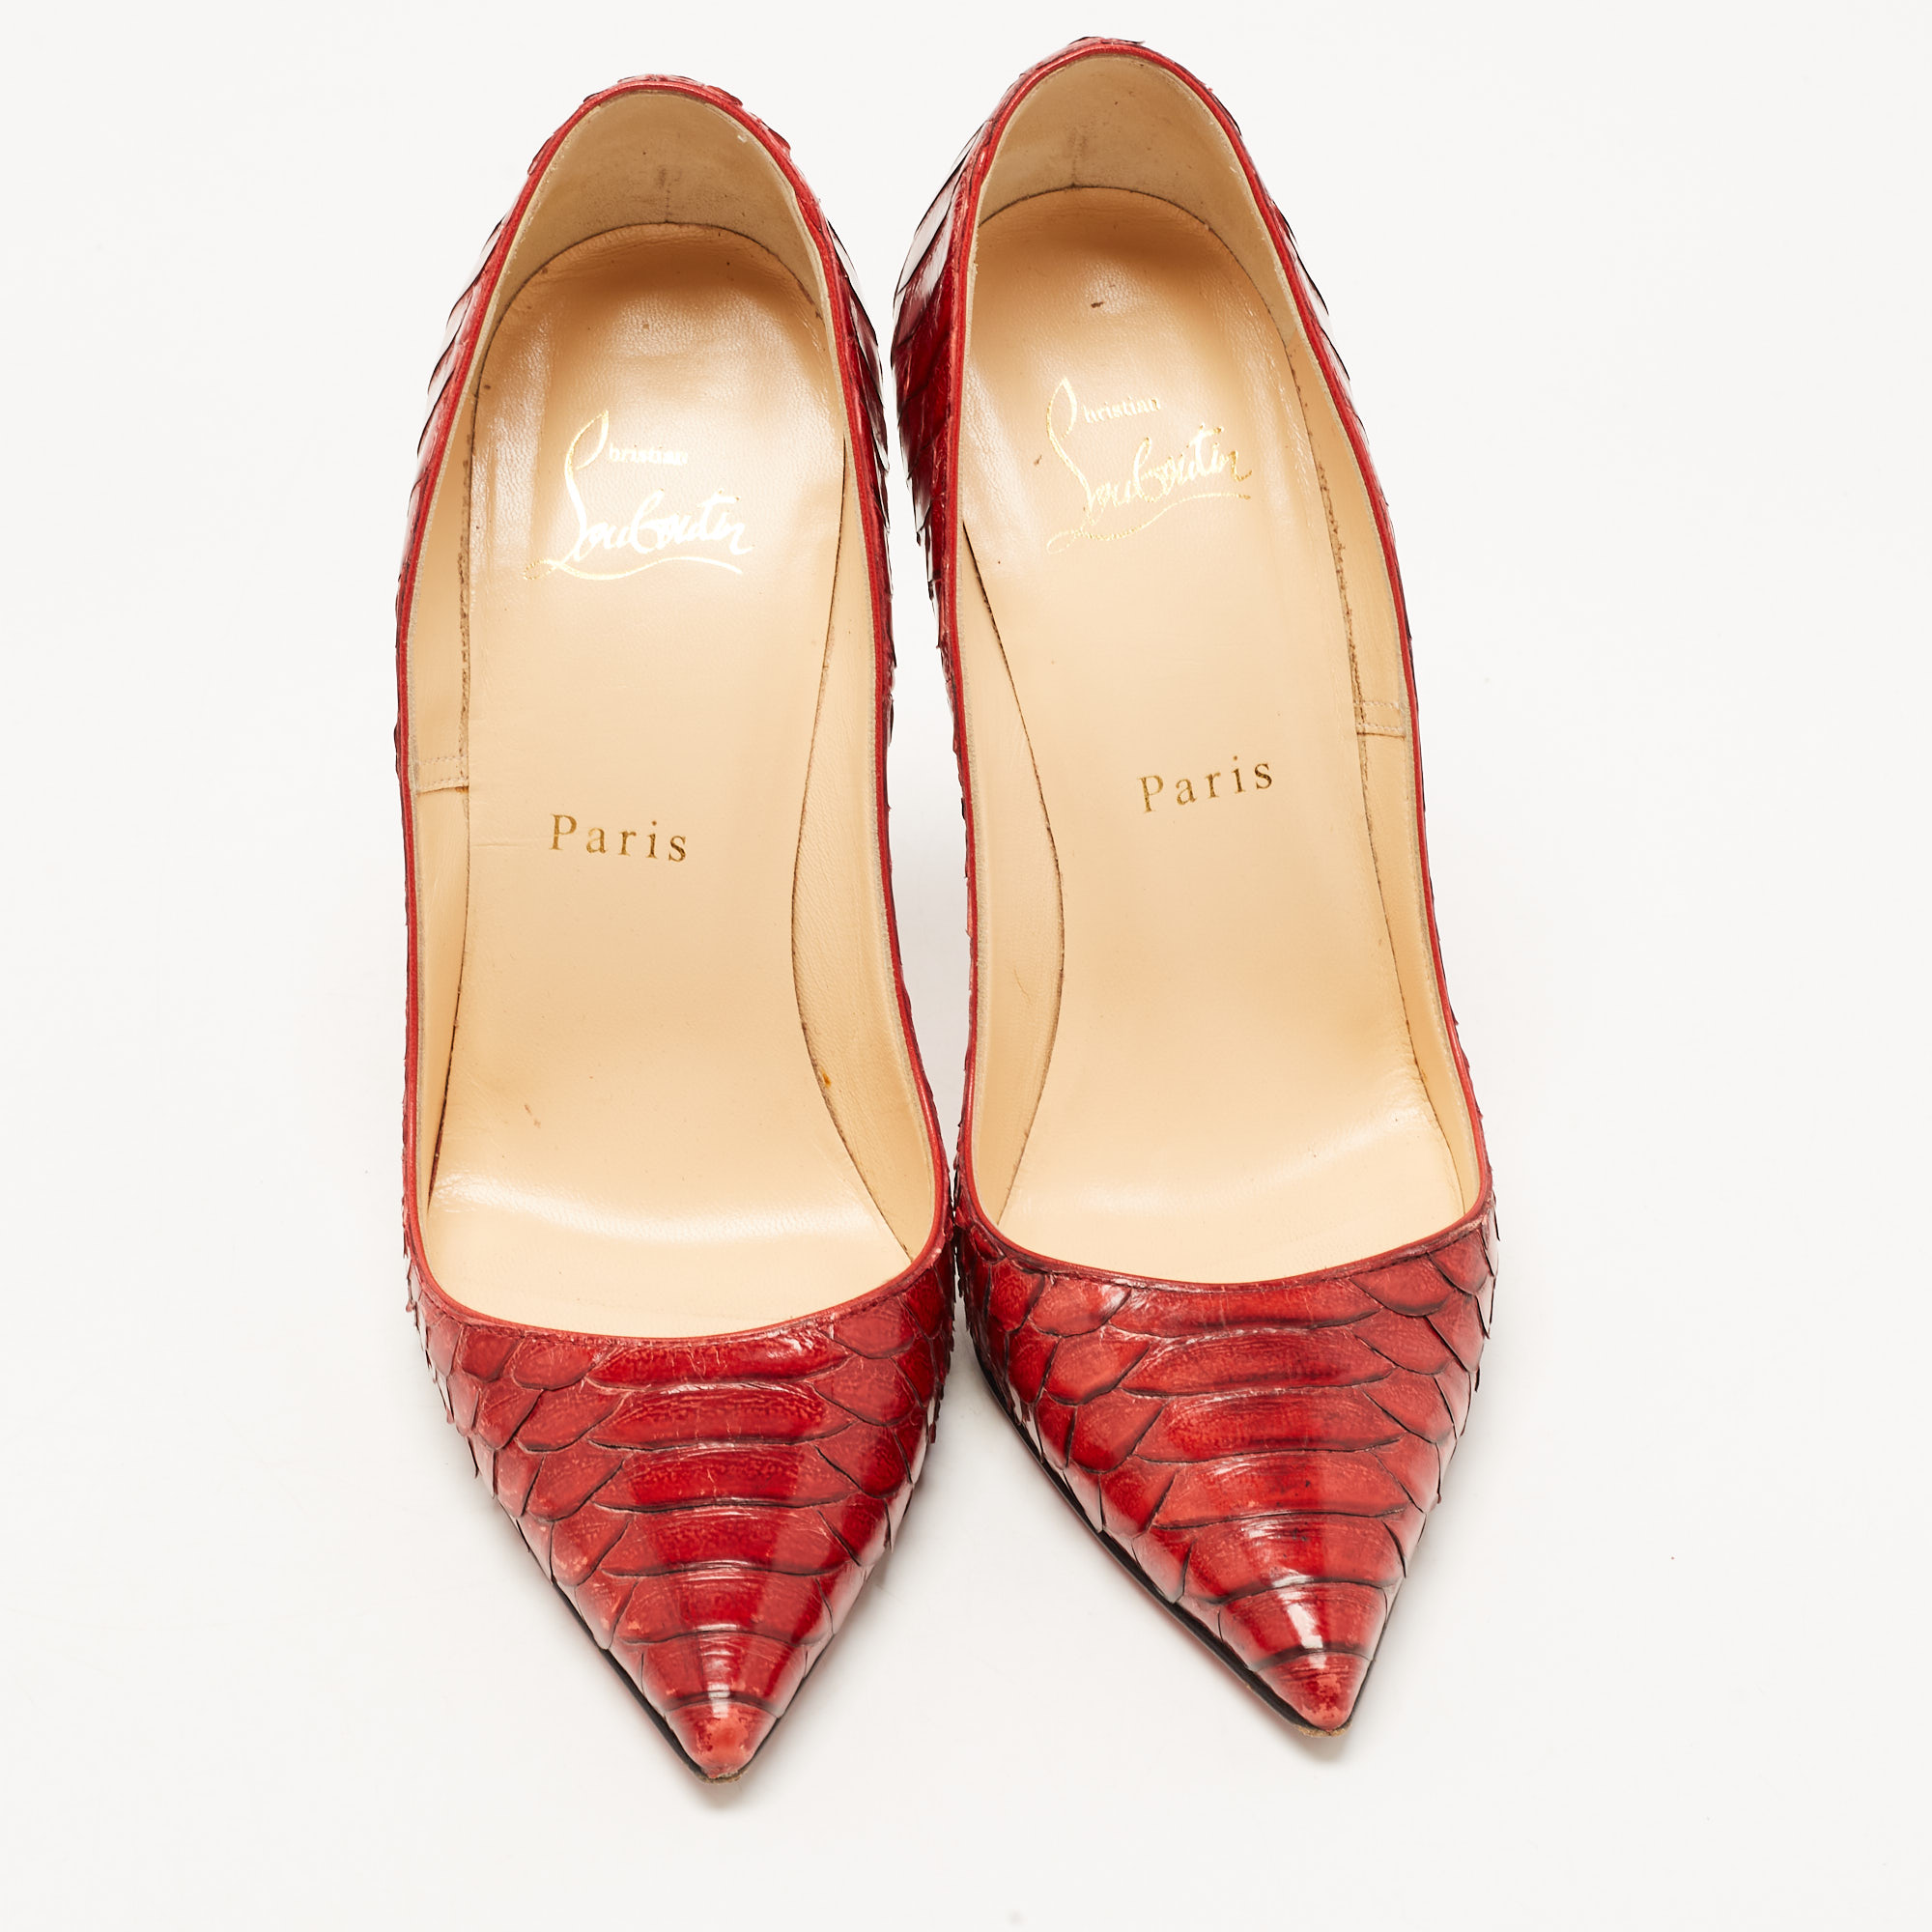 Christian Louboutin Red Python So Kate Pointed Toe Pumps Size 36.5